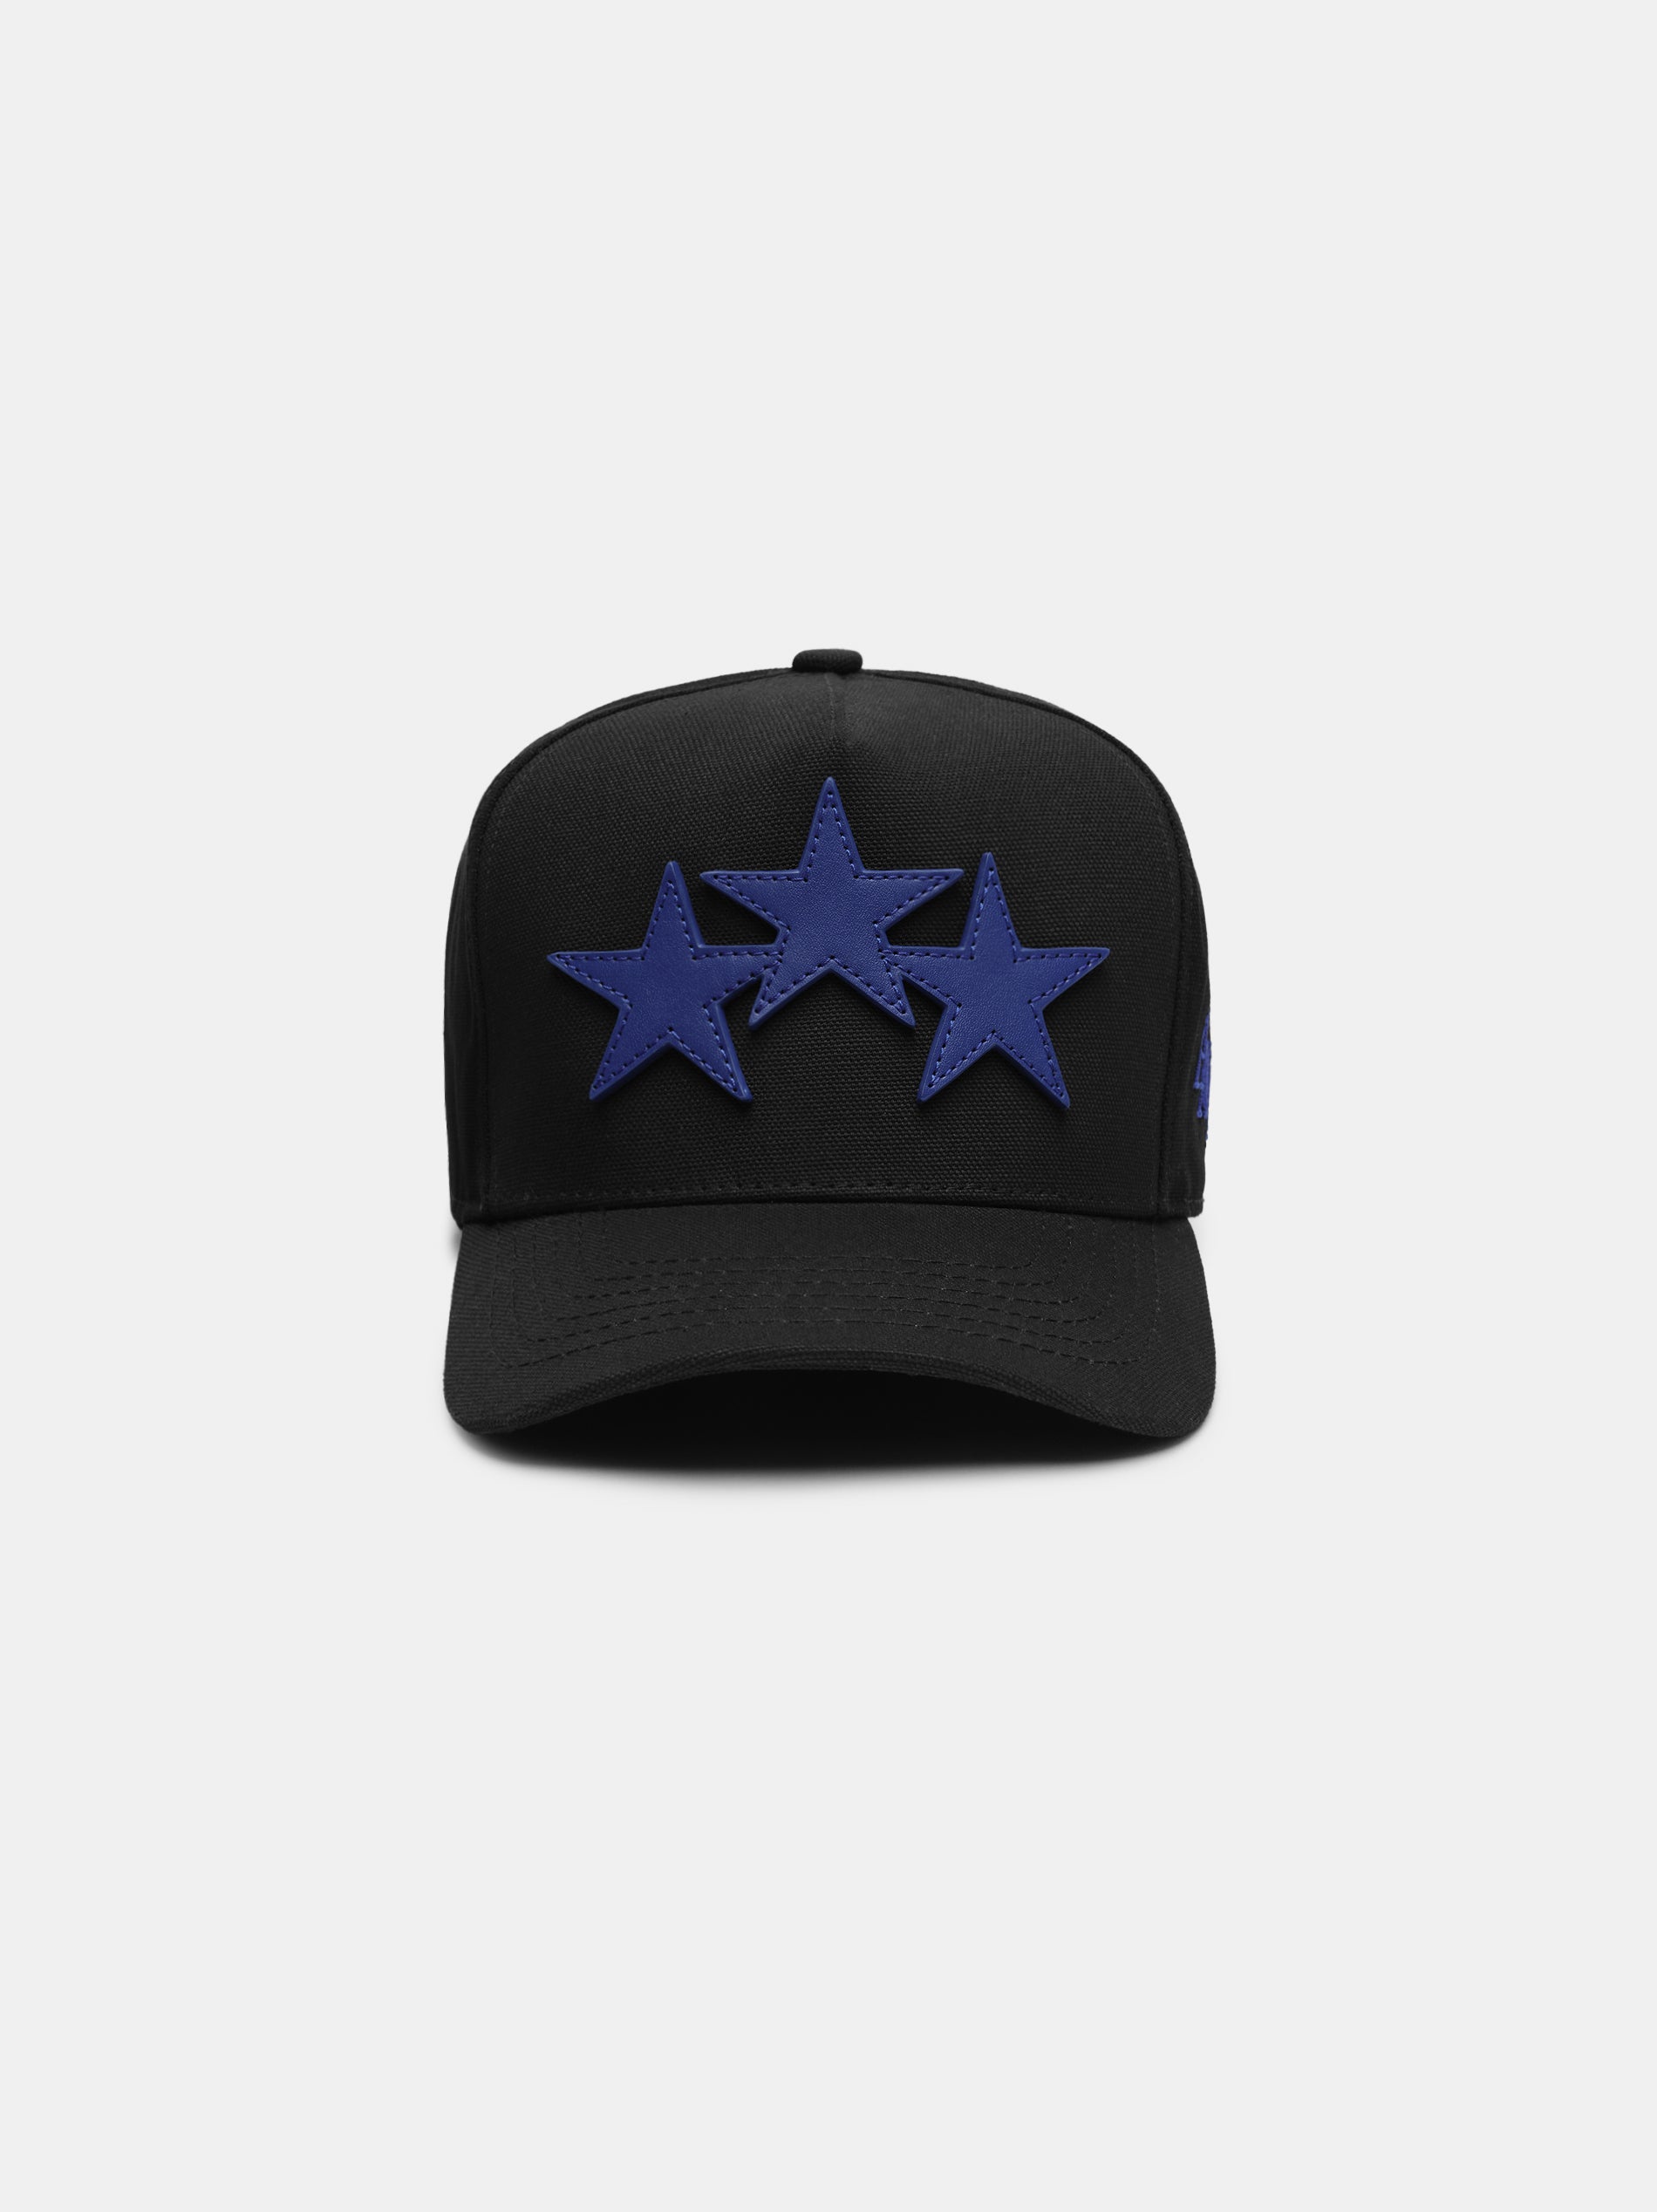 Product THREE STAR STAGGERED AMIRI FULL CANVAS HAT - Black Blue featured image